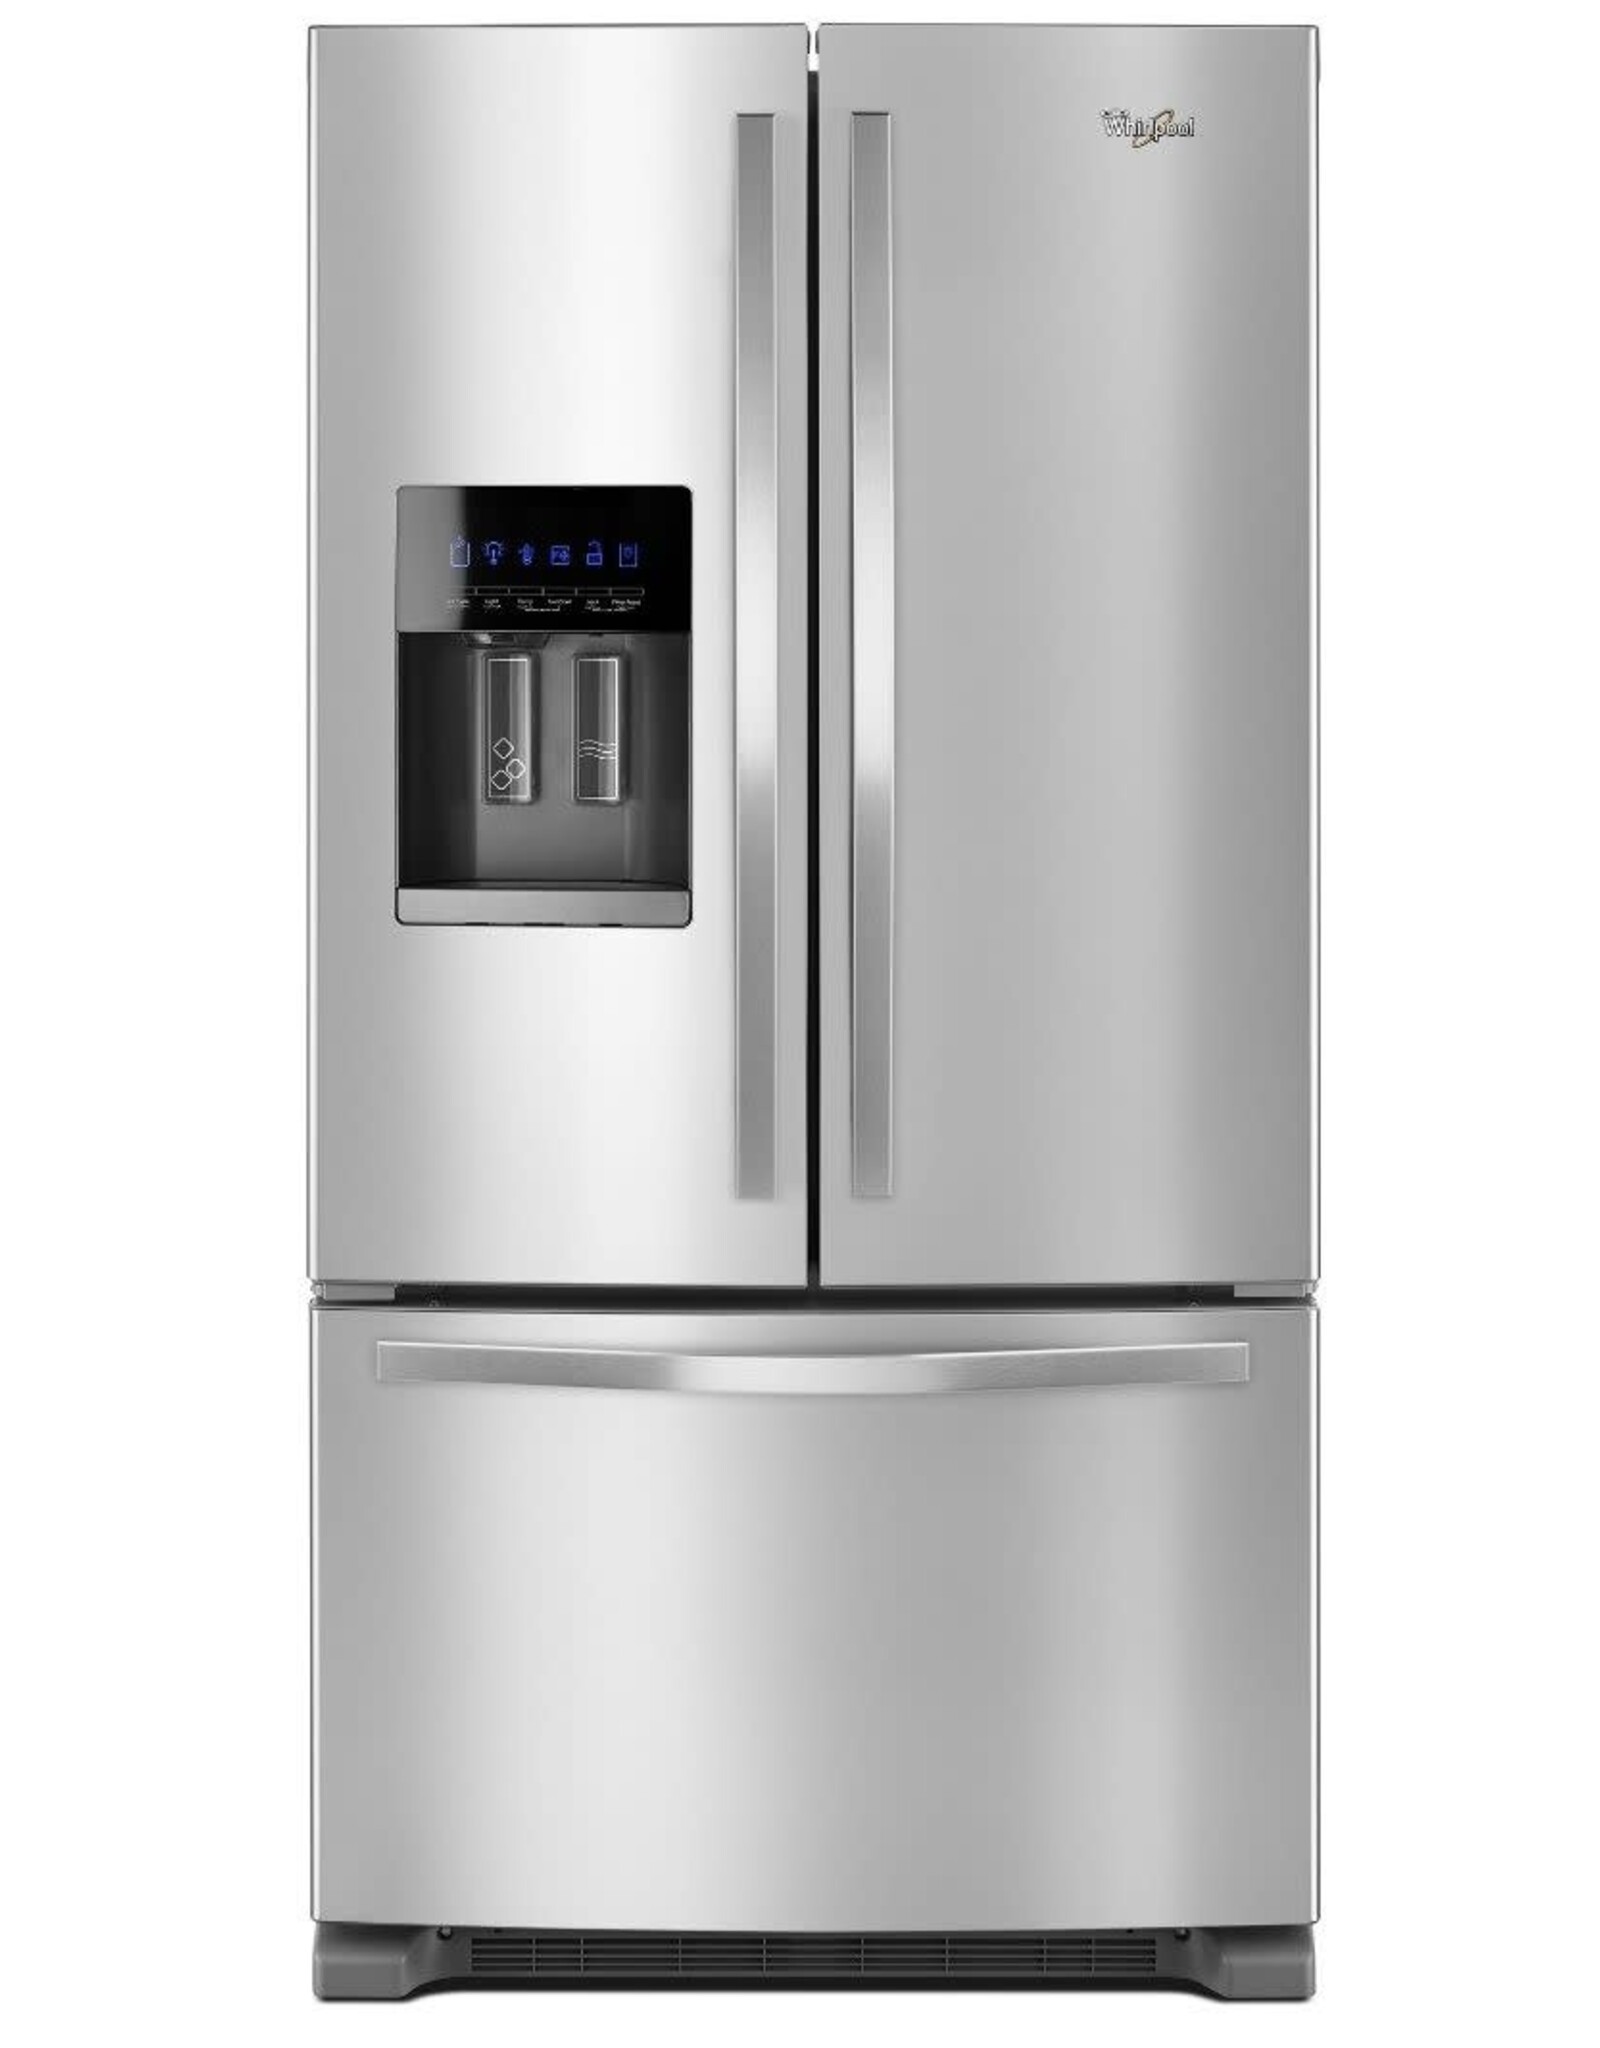 Whirlpool WRF555SDFZ 24.7-cu ft French Door Refrigerator with Ice Maker (Fingerprint Resistant Stainless Steel) ENERGY STAR